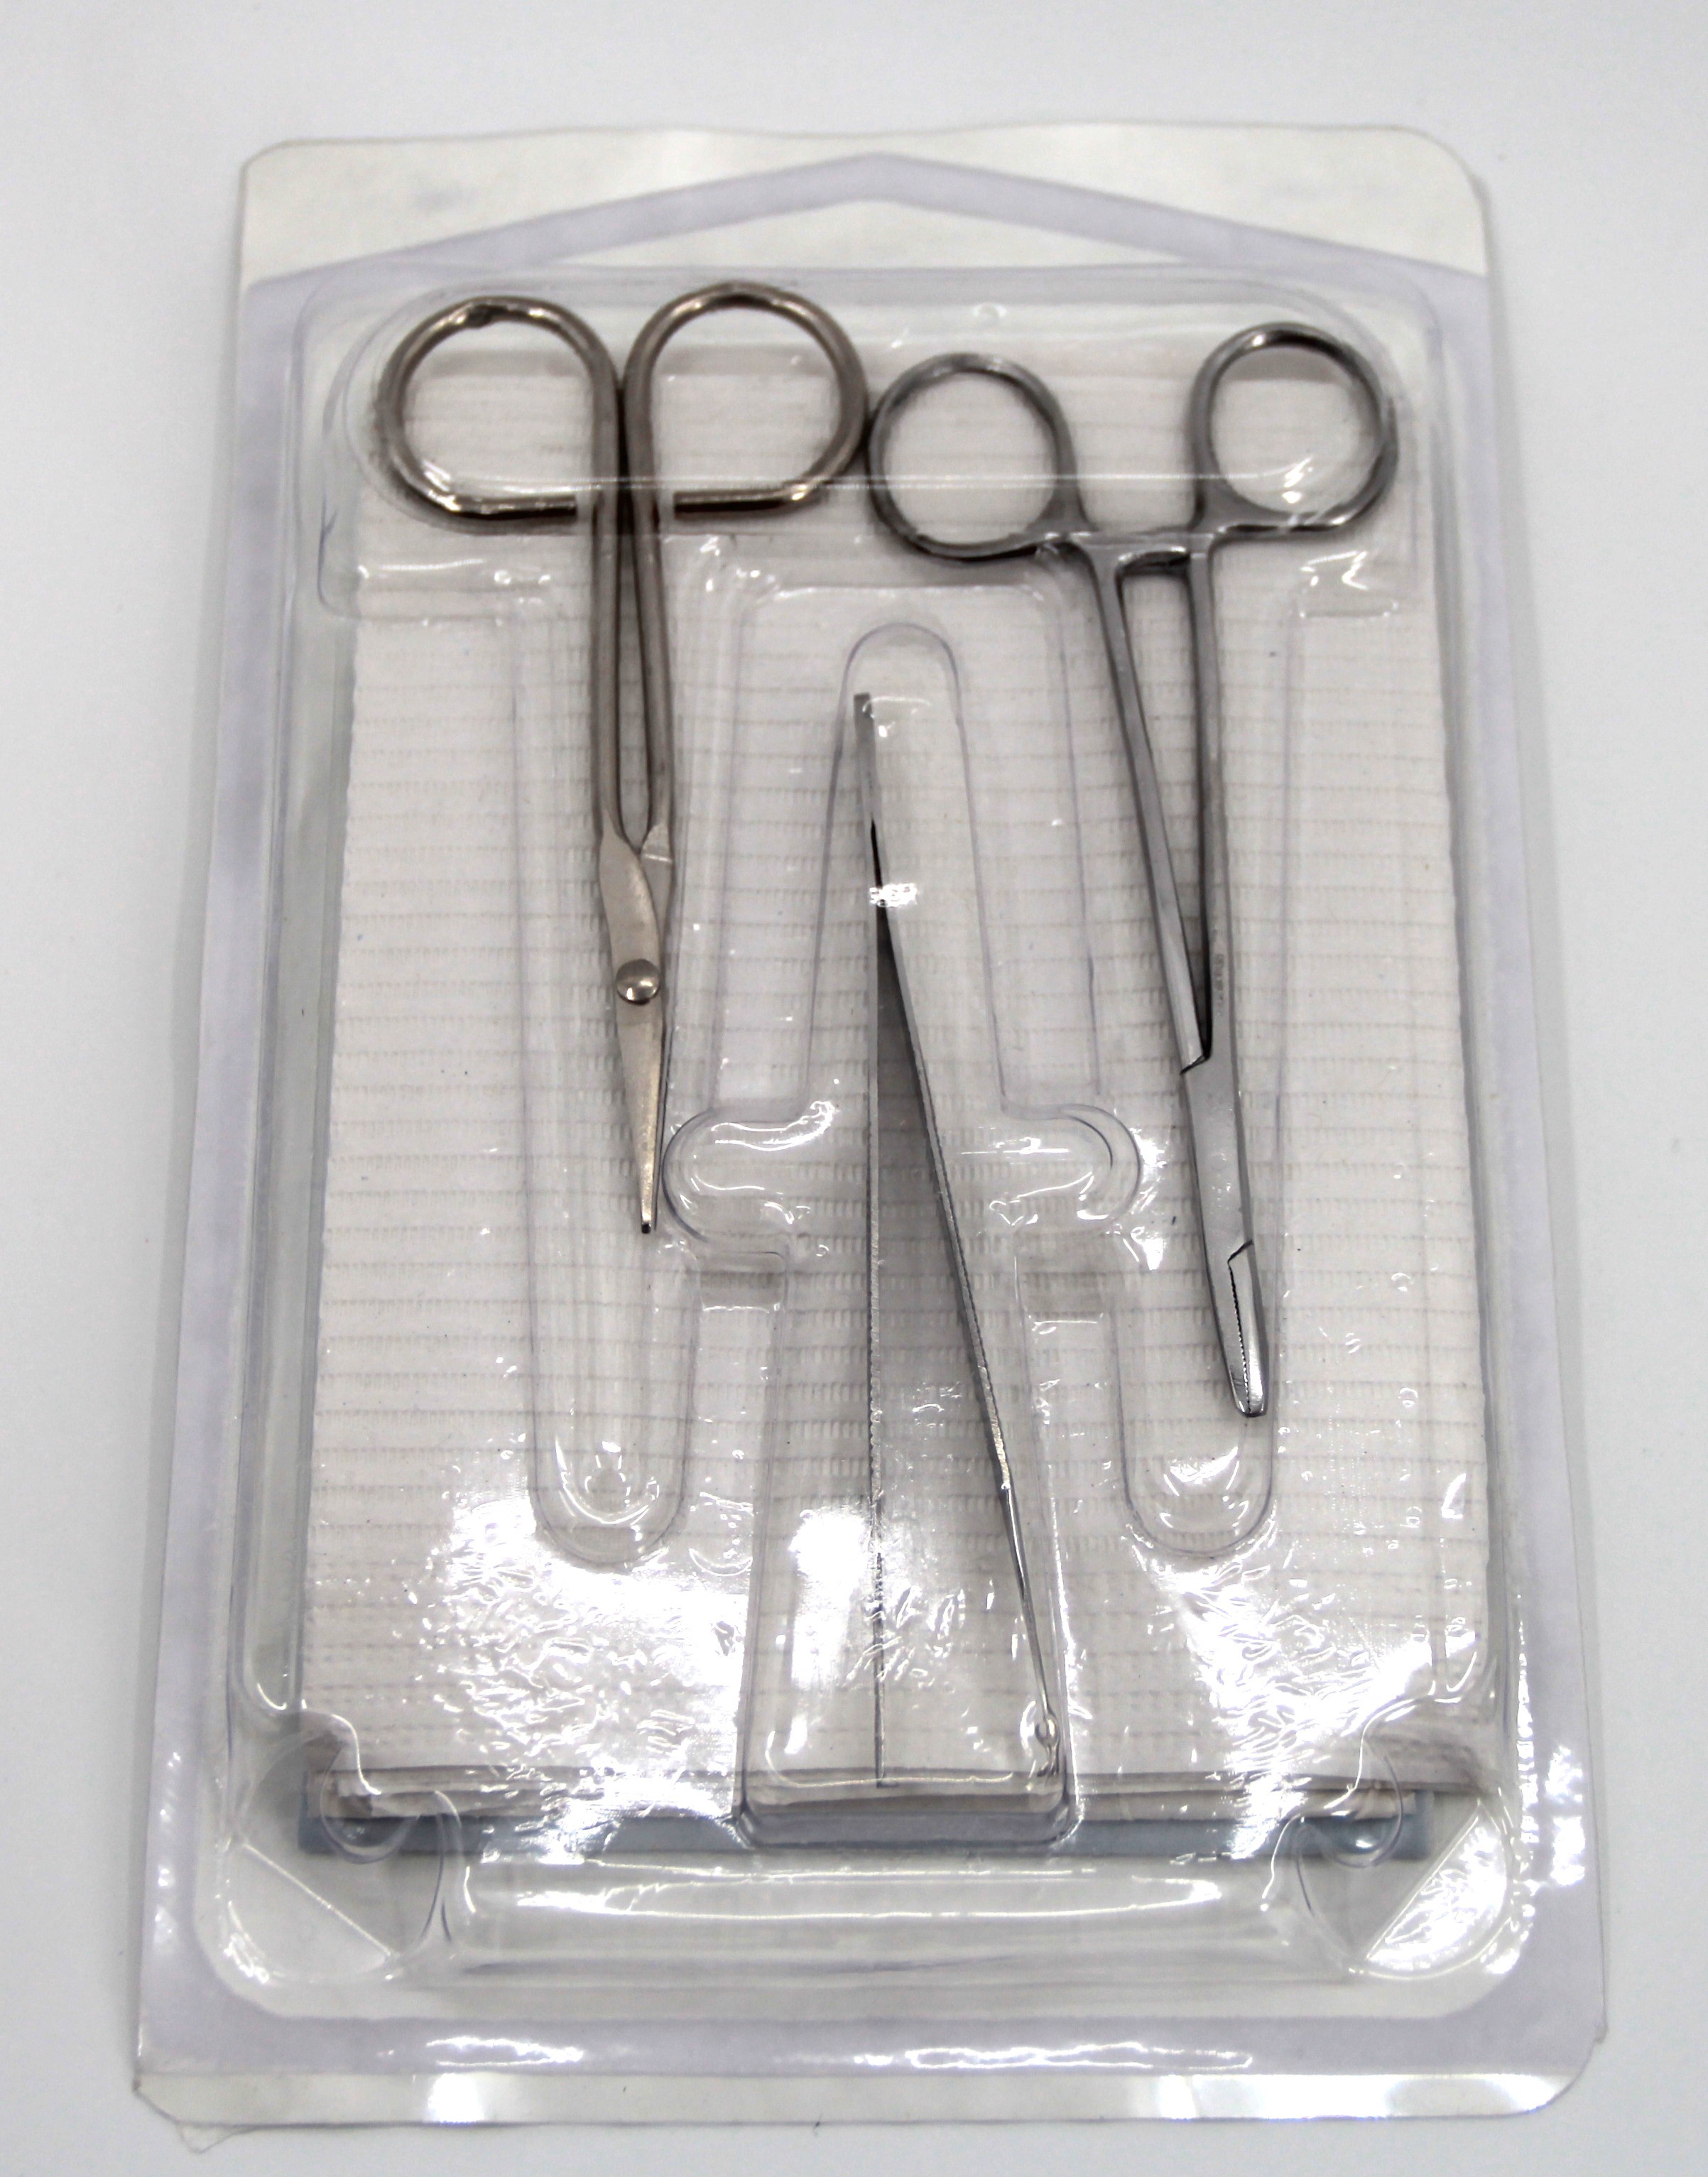 Laceration Tray (w/Instruments)